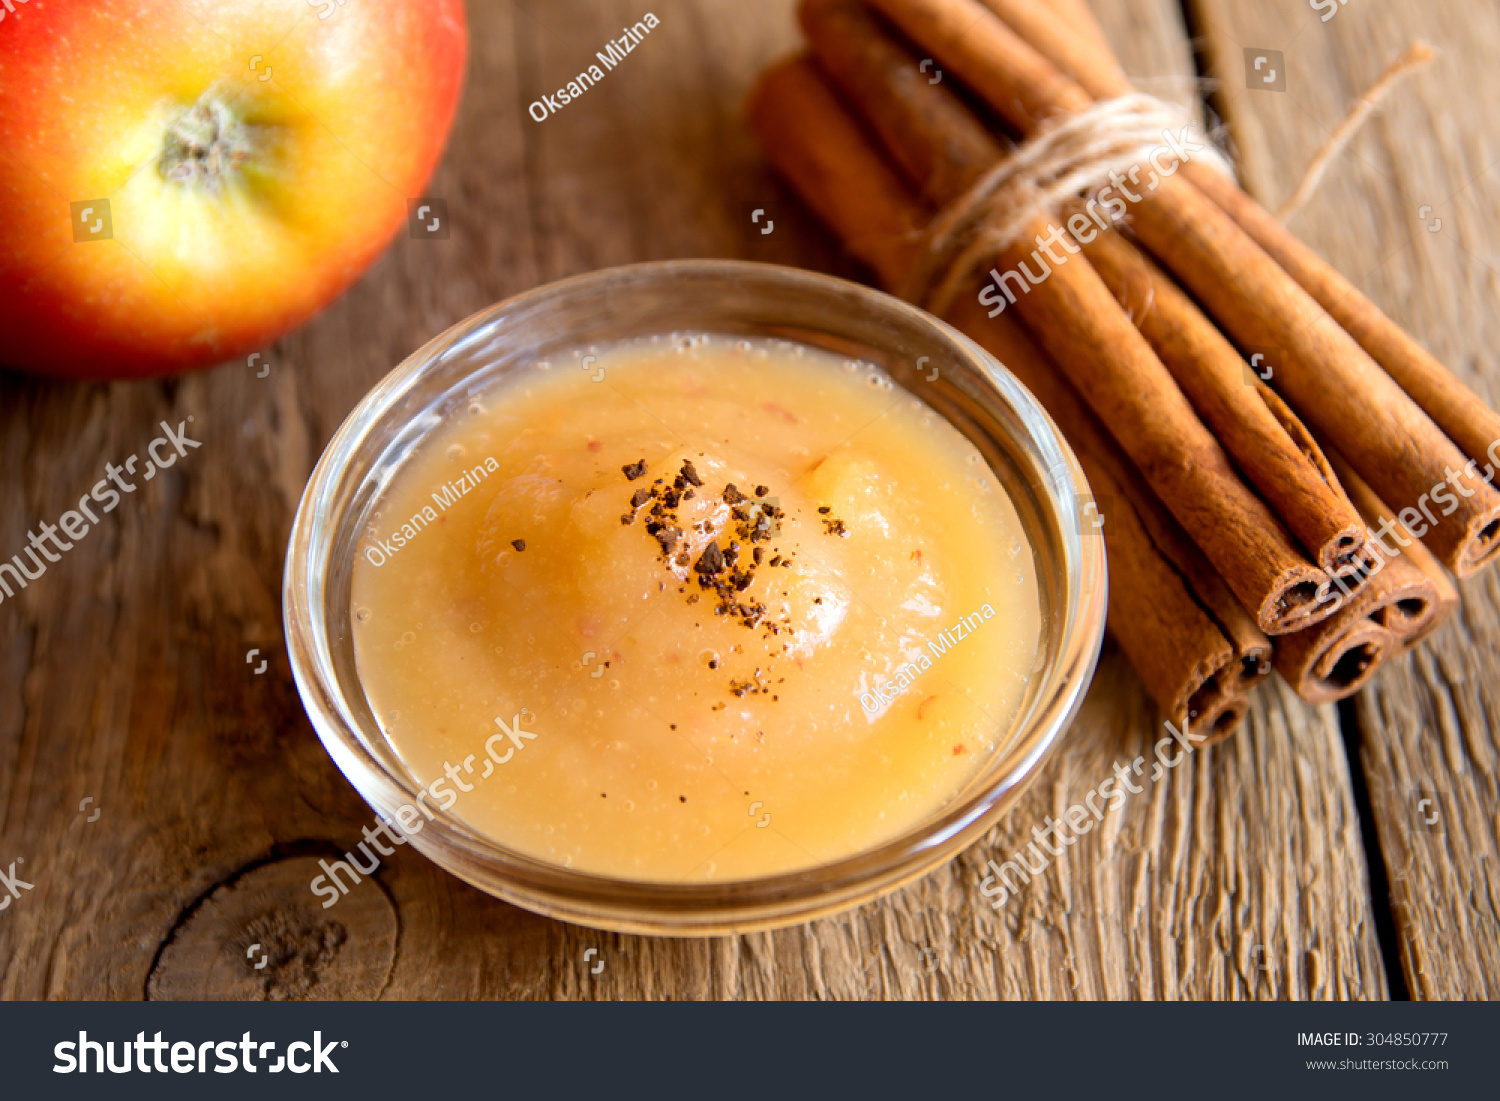 Fresh homemade applesauce (apple puree, mousse, baby food, sauce) with cinnamon (spices), spoon and apples on wooden table close up, horizontal #304850777